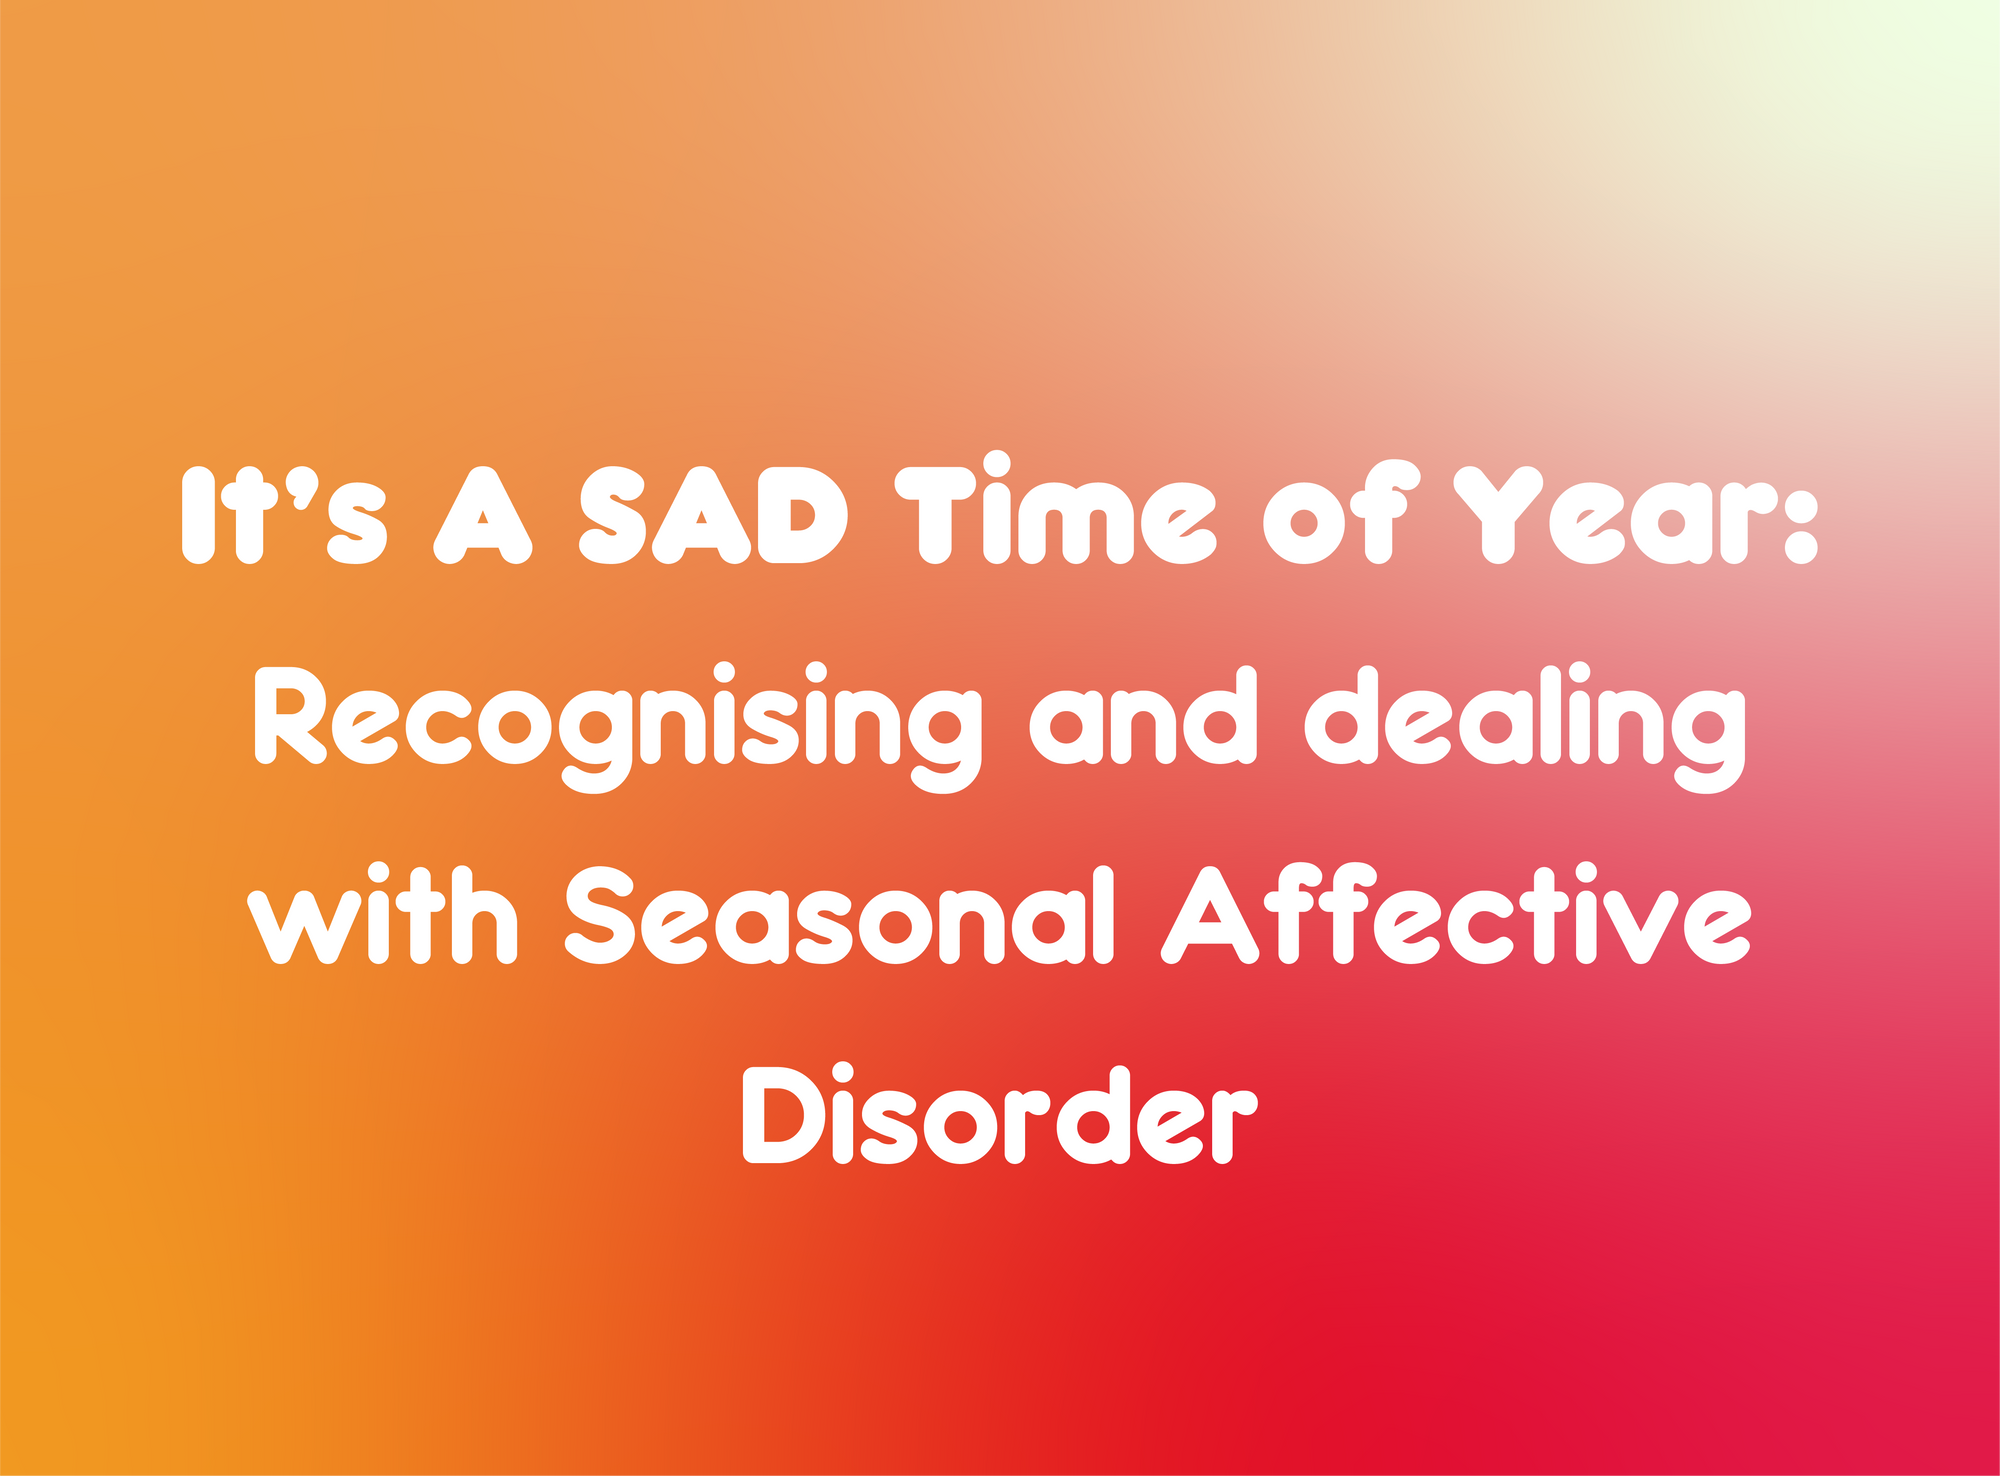 It’s A SAD Time of Year: Recognising and dealing with Seasonal Affective Disorder